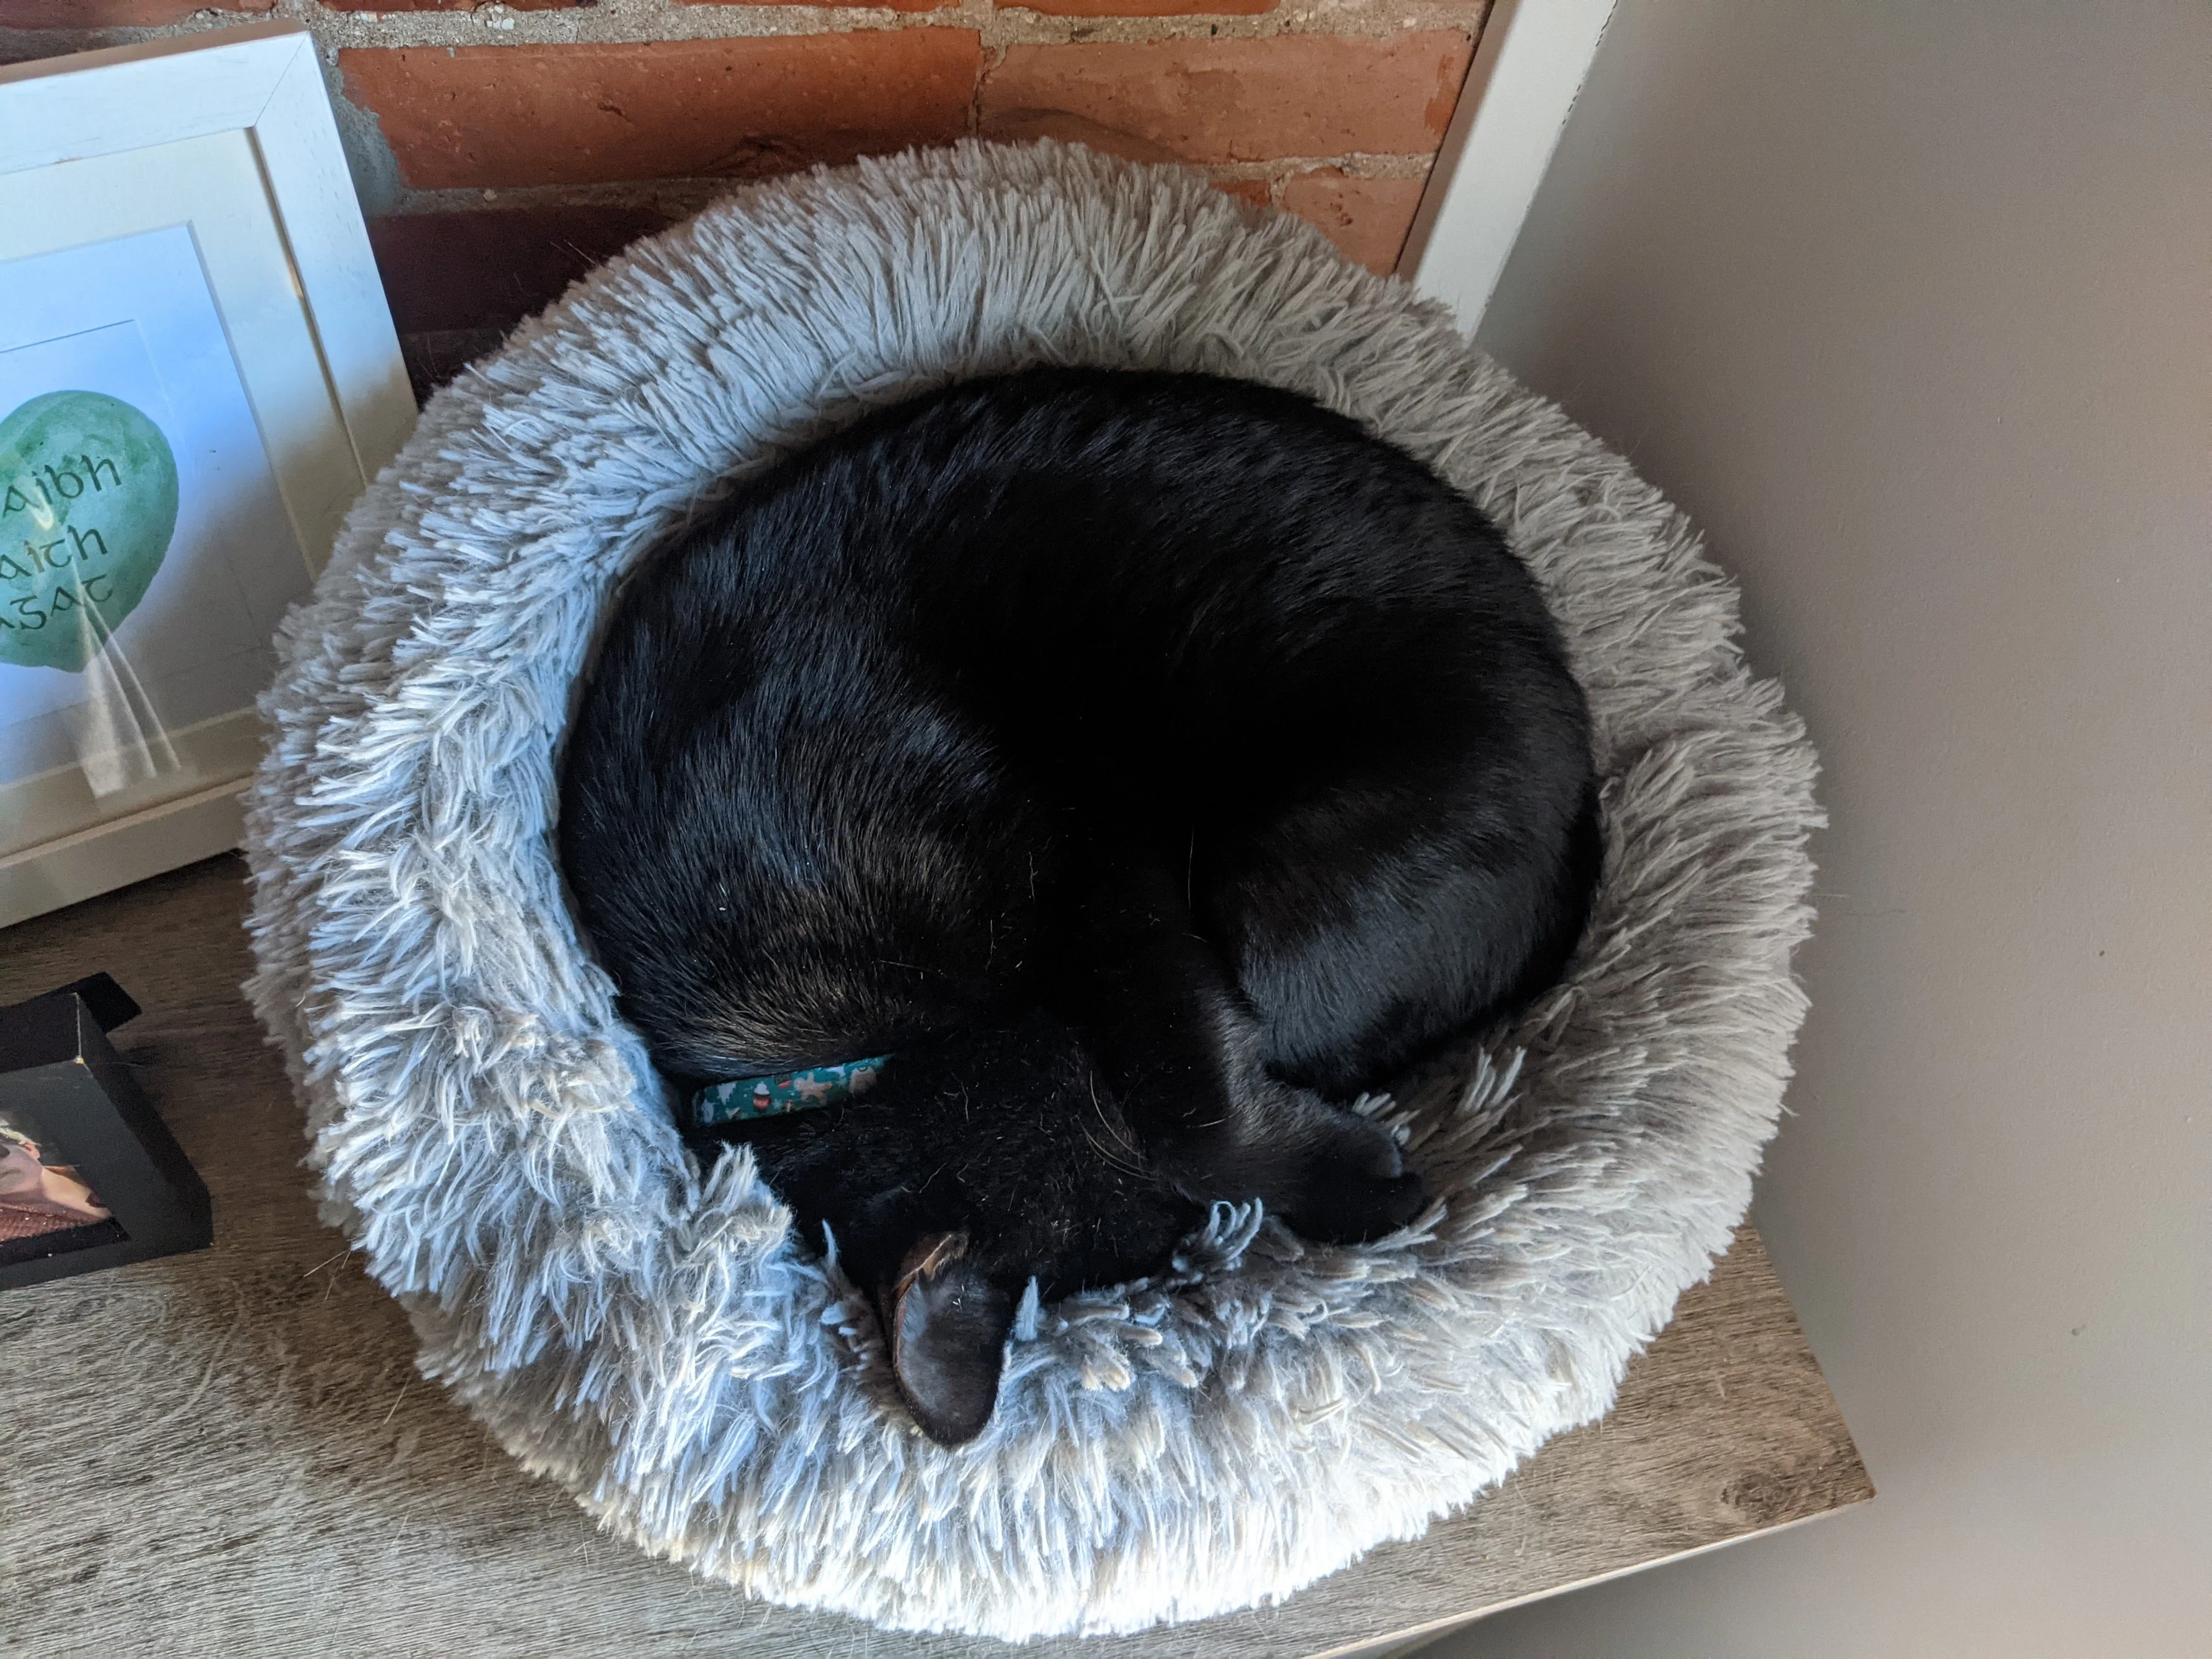 Cat rolled up in a circular ball within a fluffy white circular pet bed. Next to it are two photo frames.